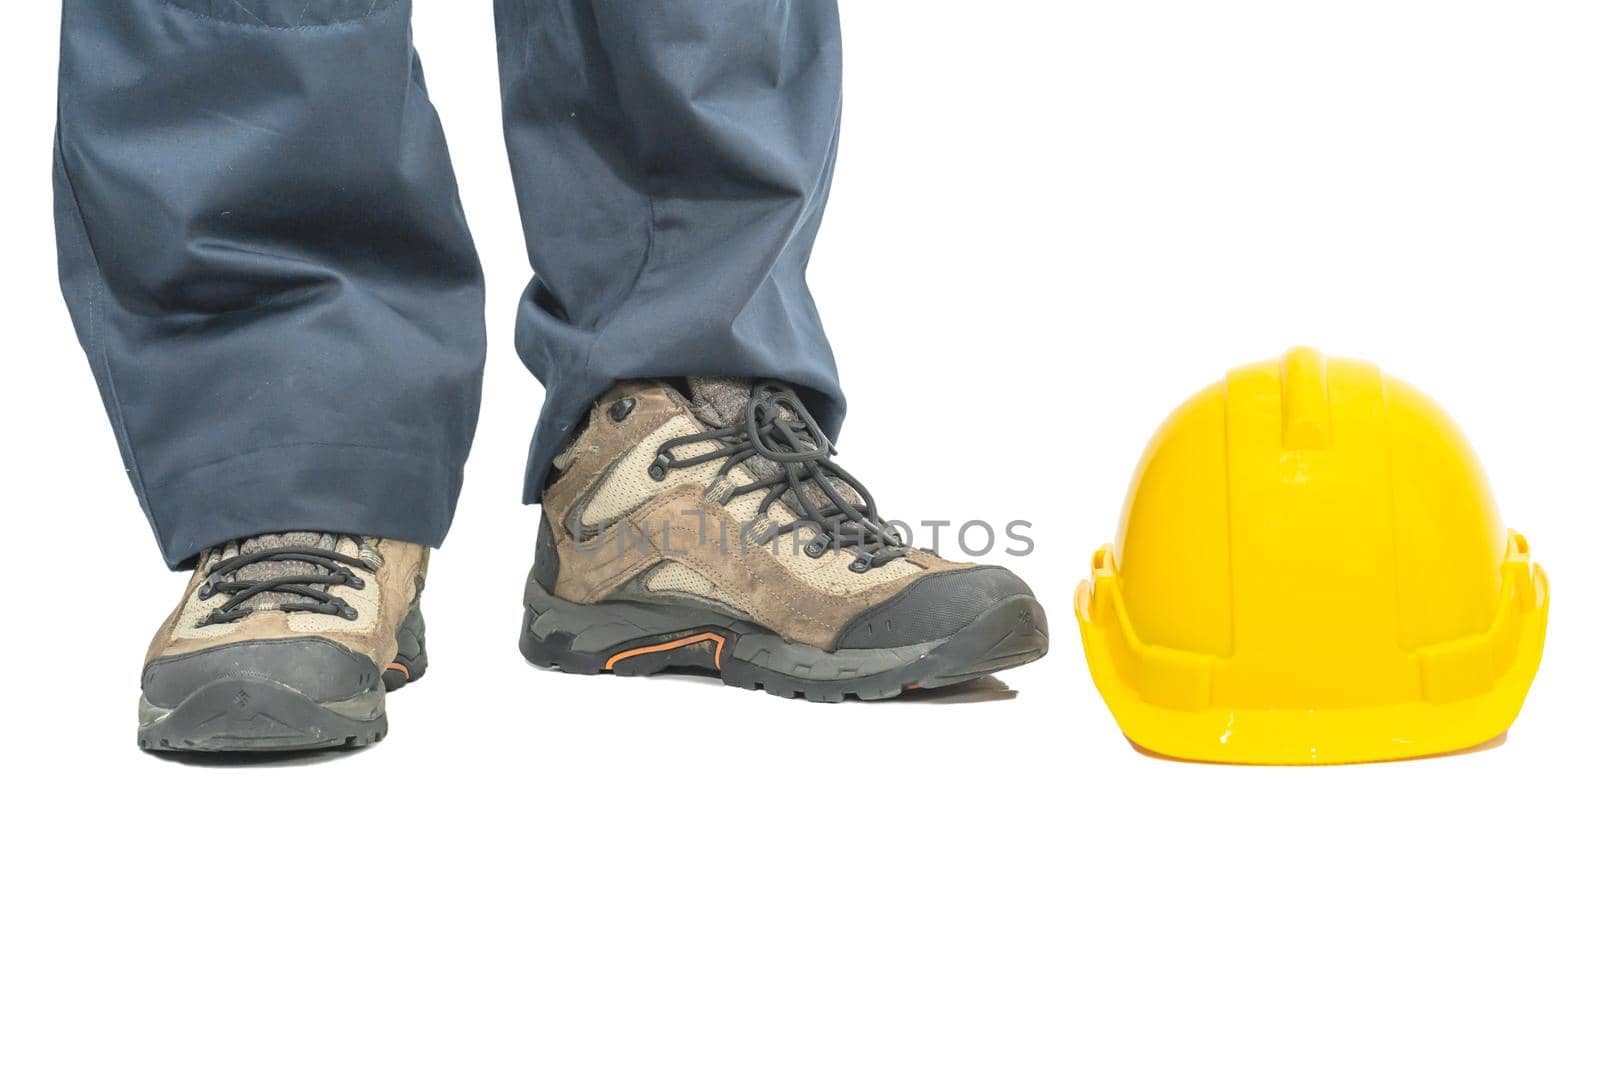 Cloes up Worker standing in blue coverall and yellow hardhat on white background